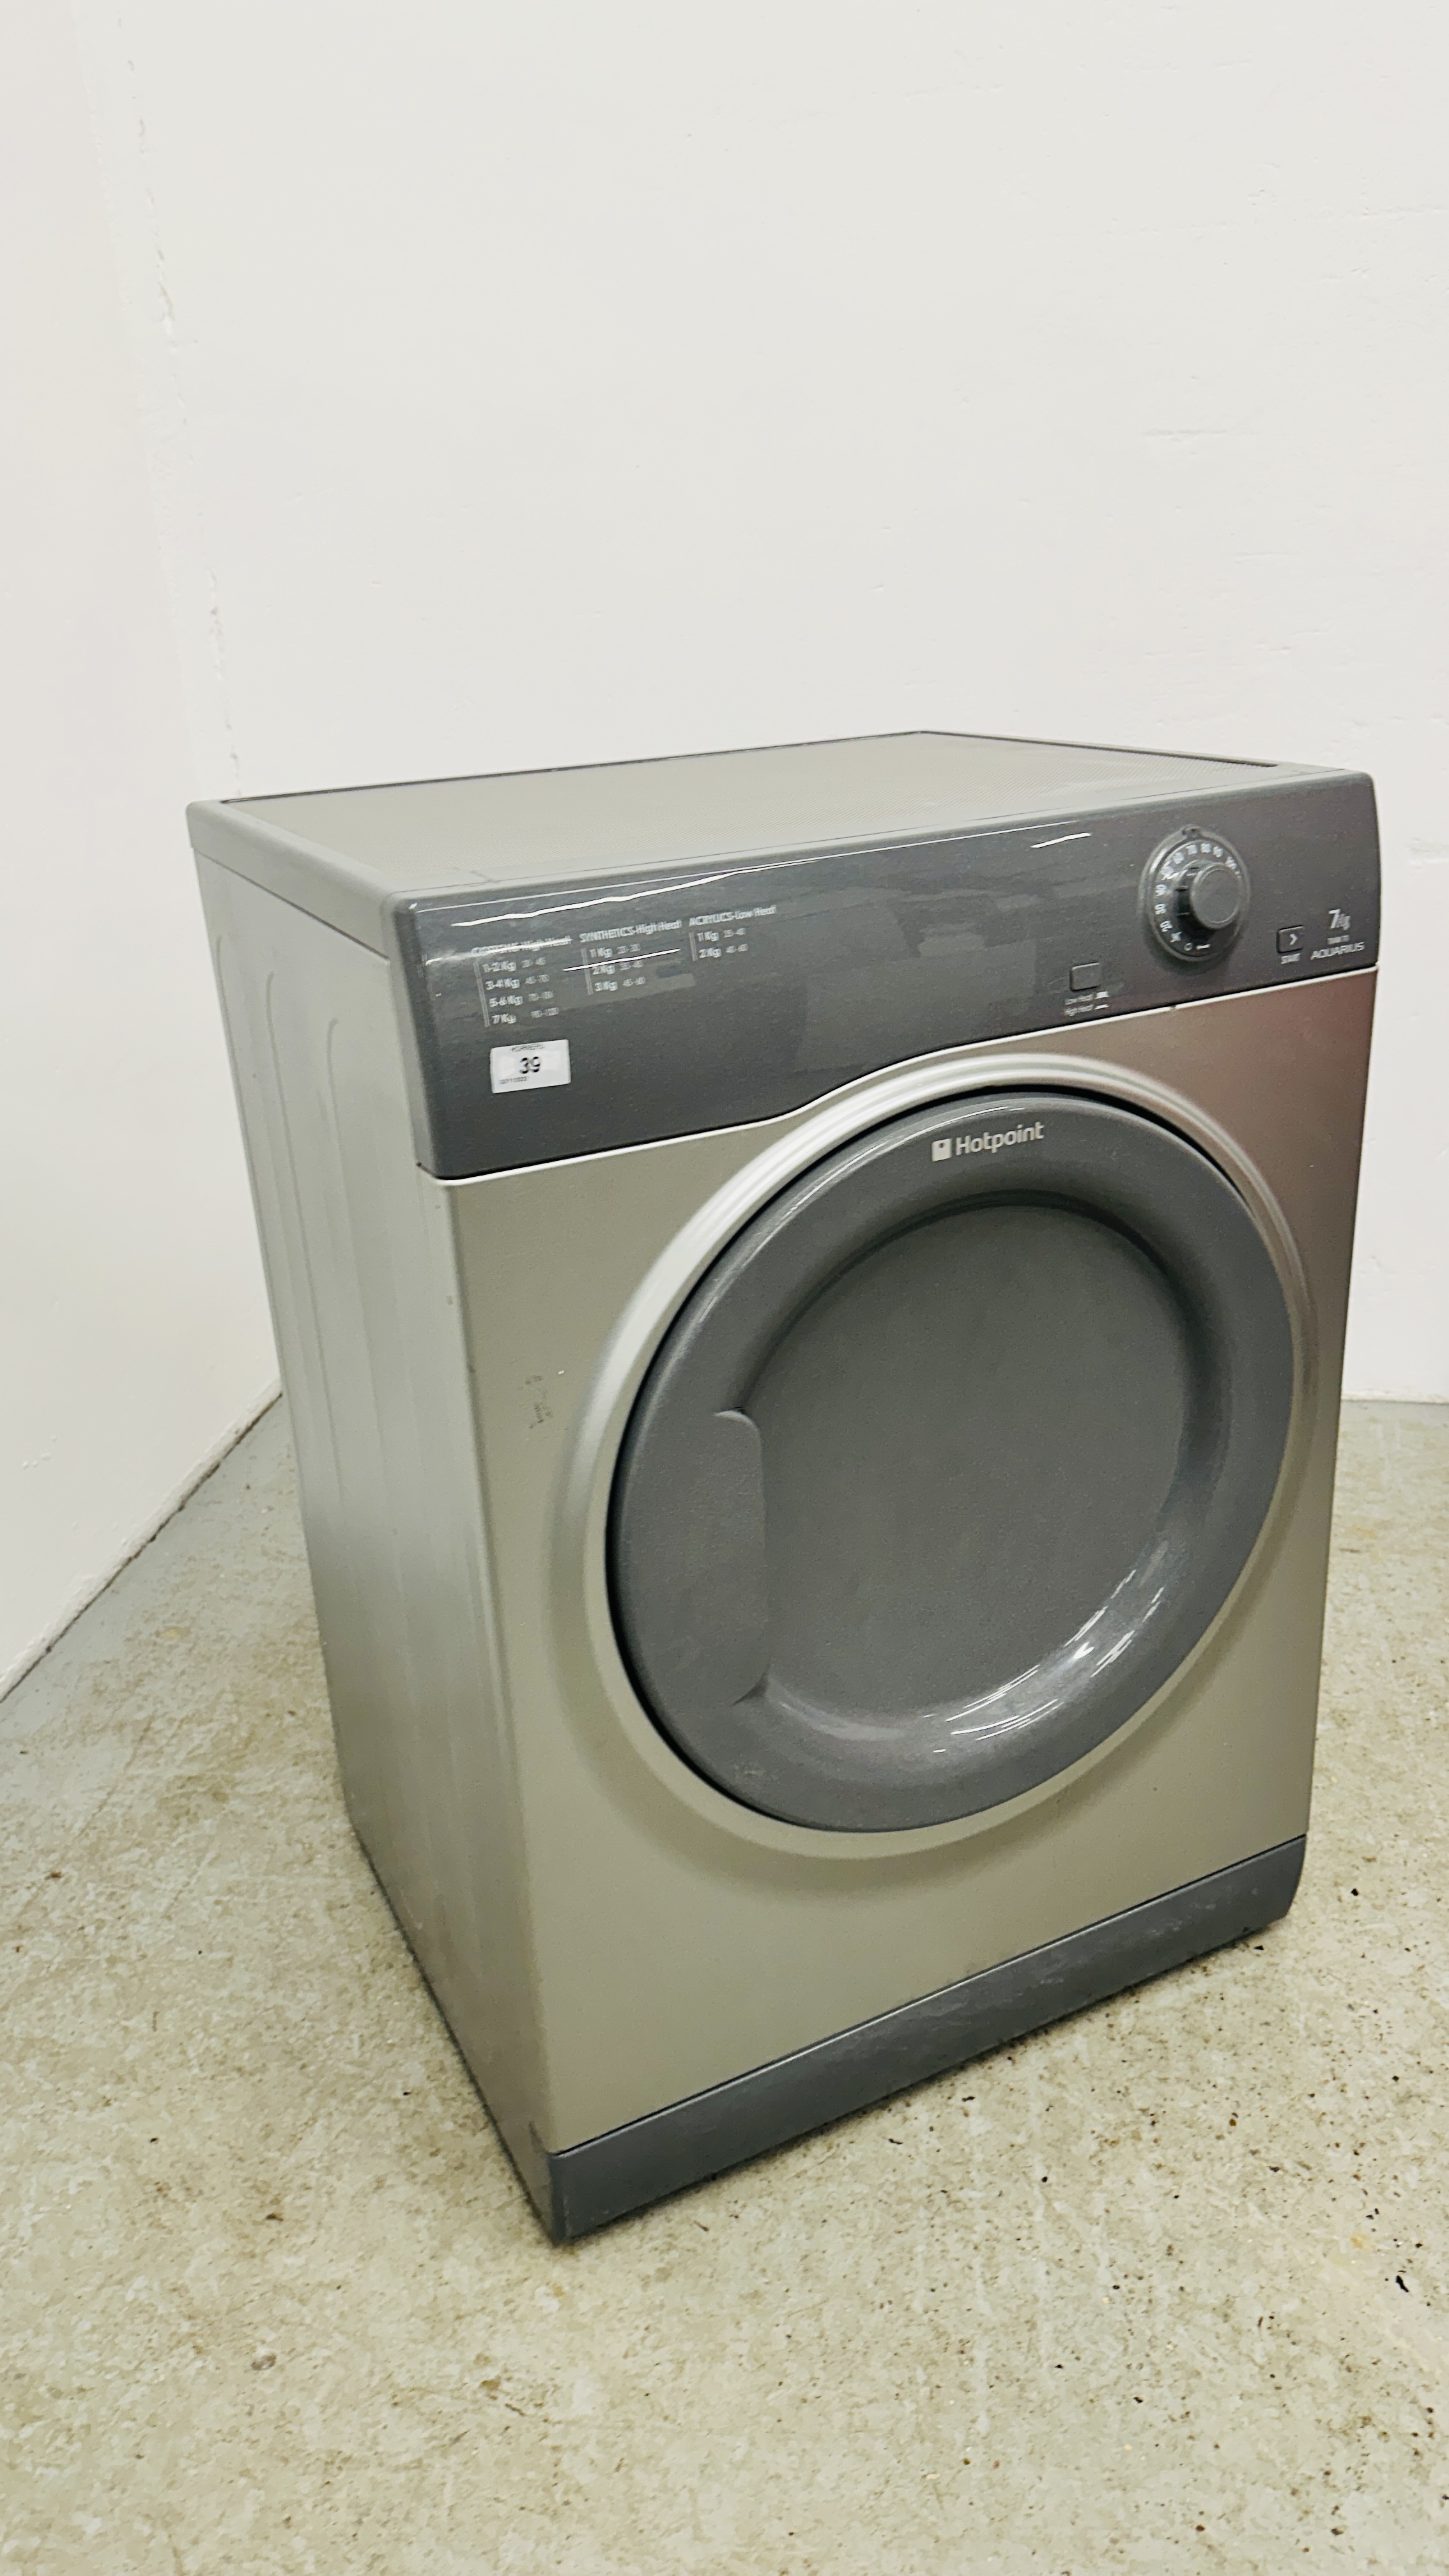 HOTPOINT AQUARIUS 7KG TUMBLE DRYER, SILVER FINISH - SOLD AS SEEN. - Image 5 of 6